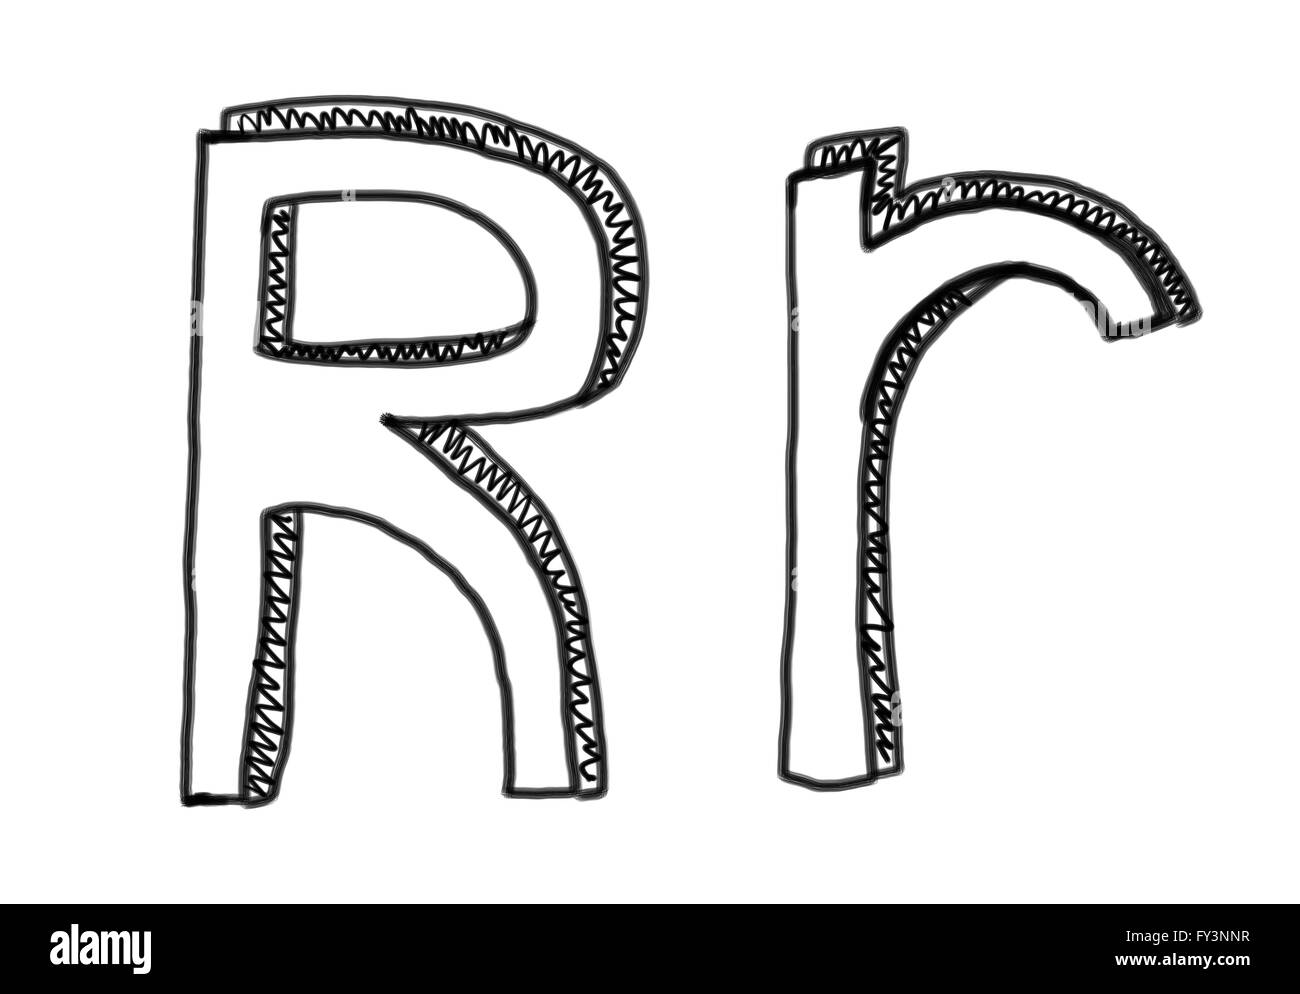 New drawing Character R of alphabet logo icon in design elements. Stock Photo